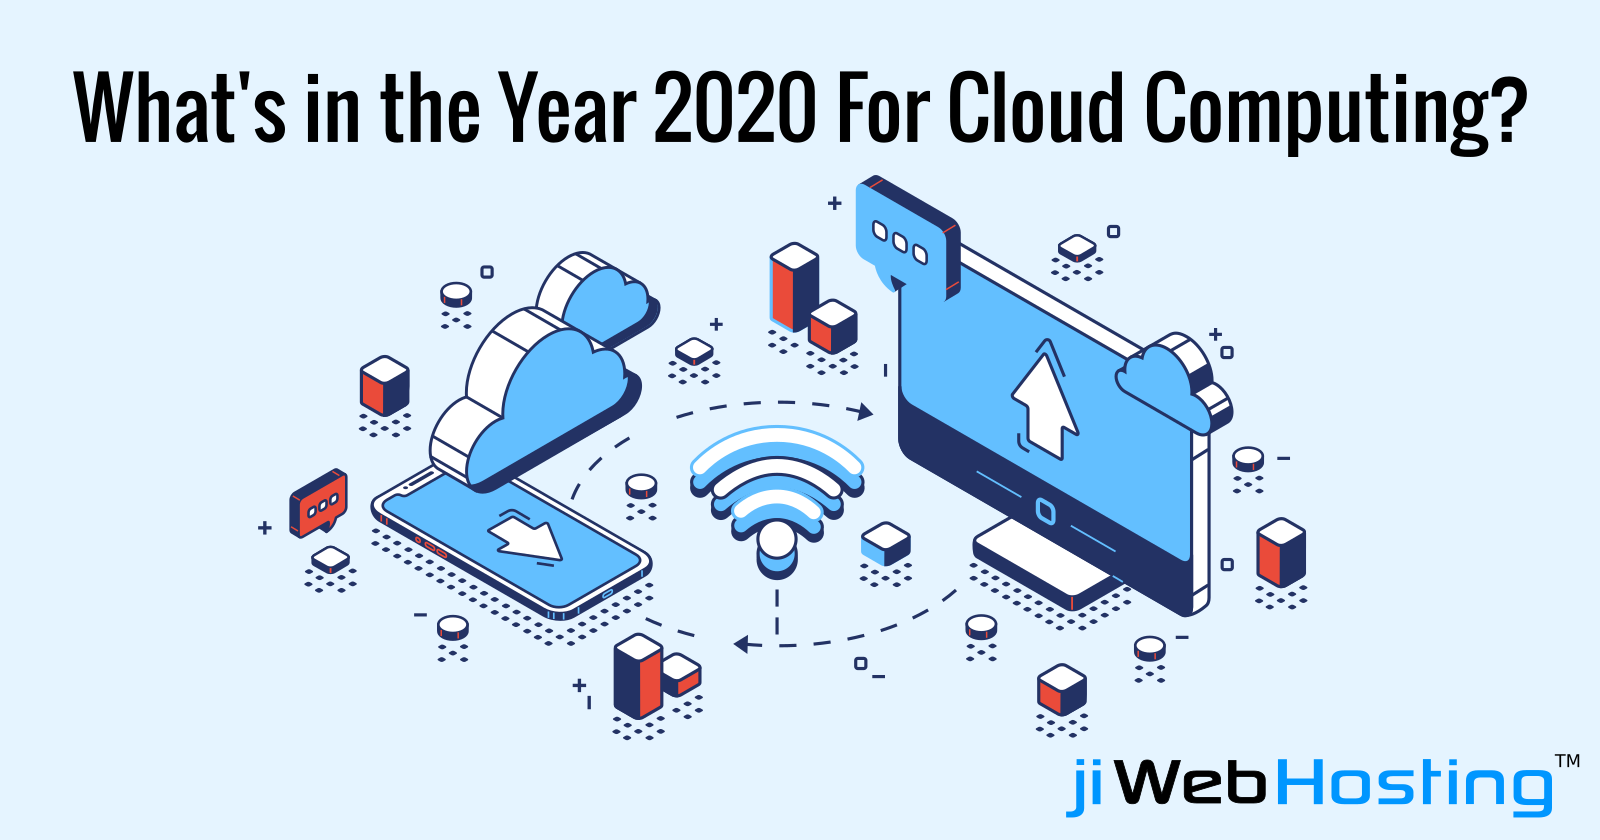 What's in the Year 2020 For Cloud Computing?